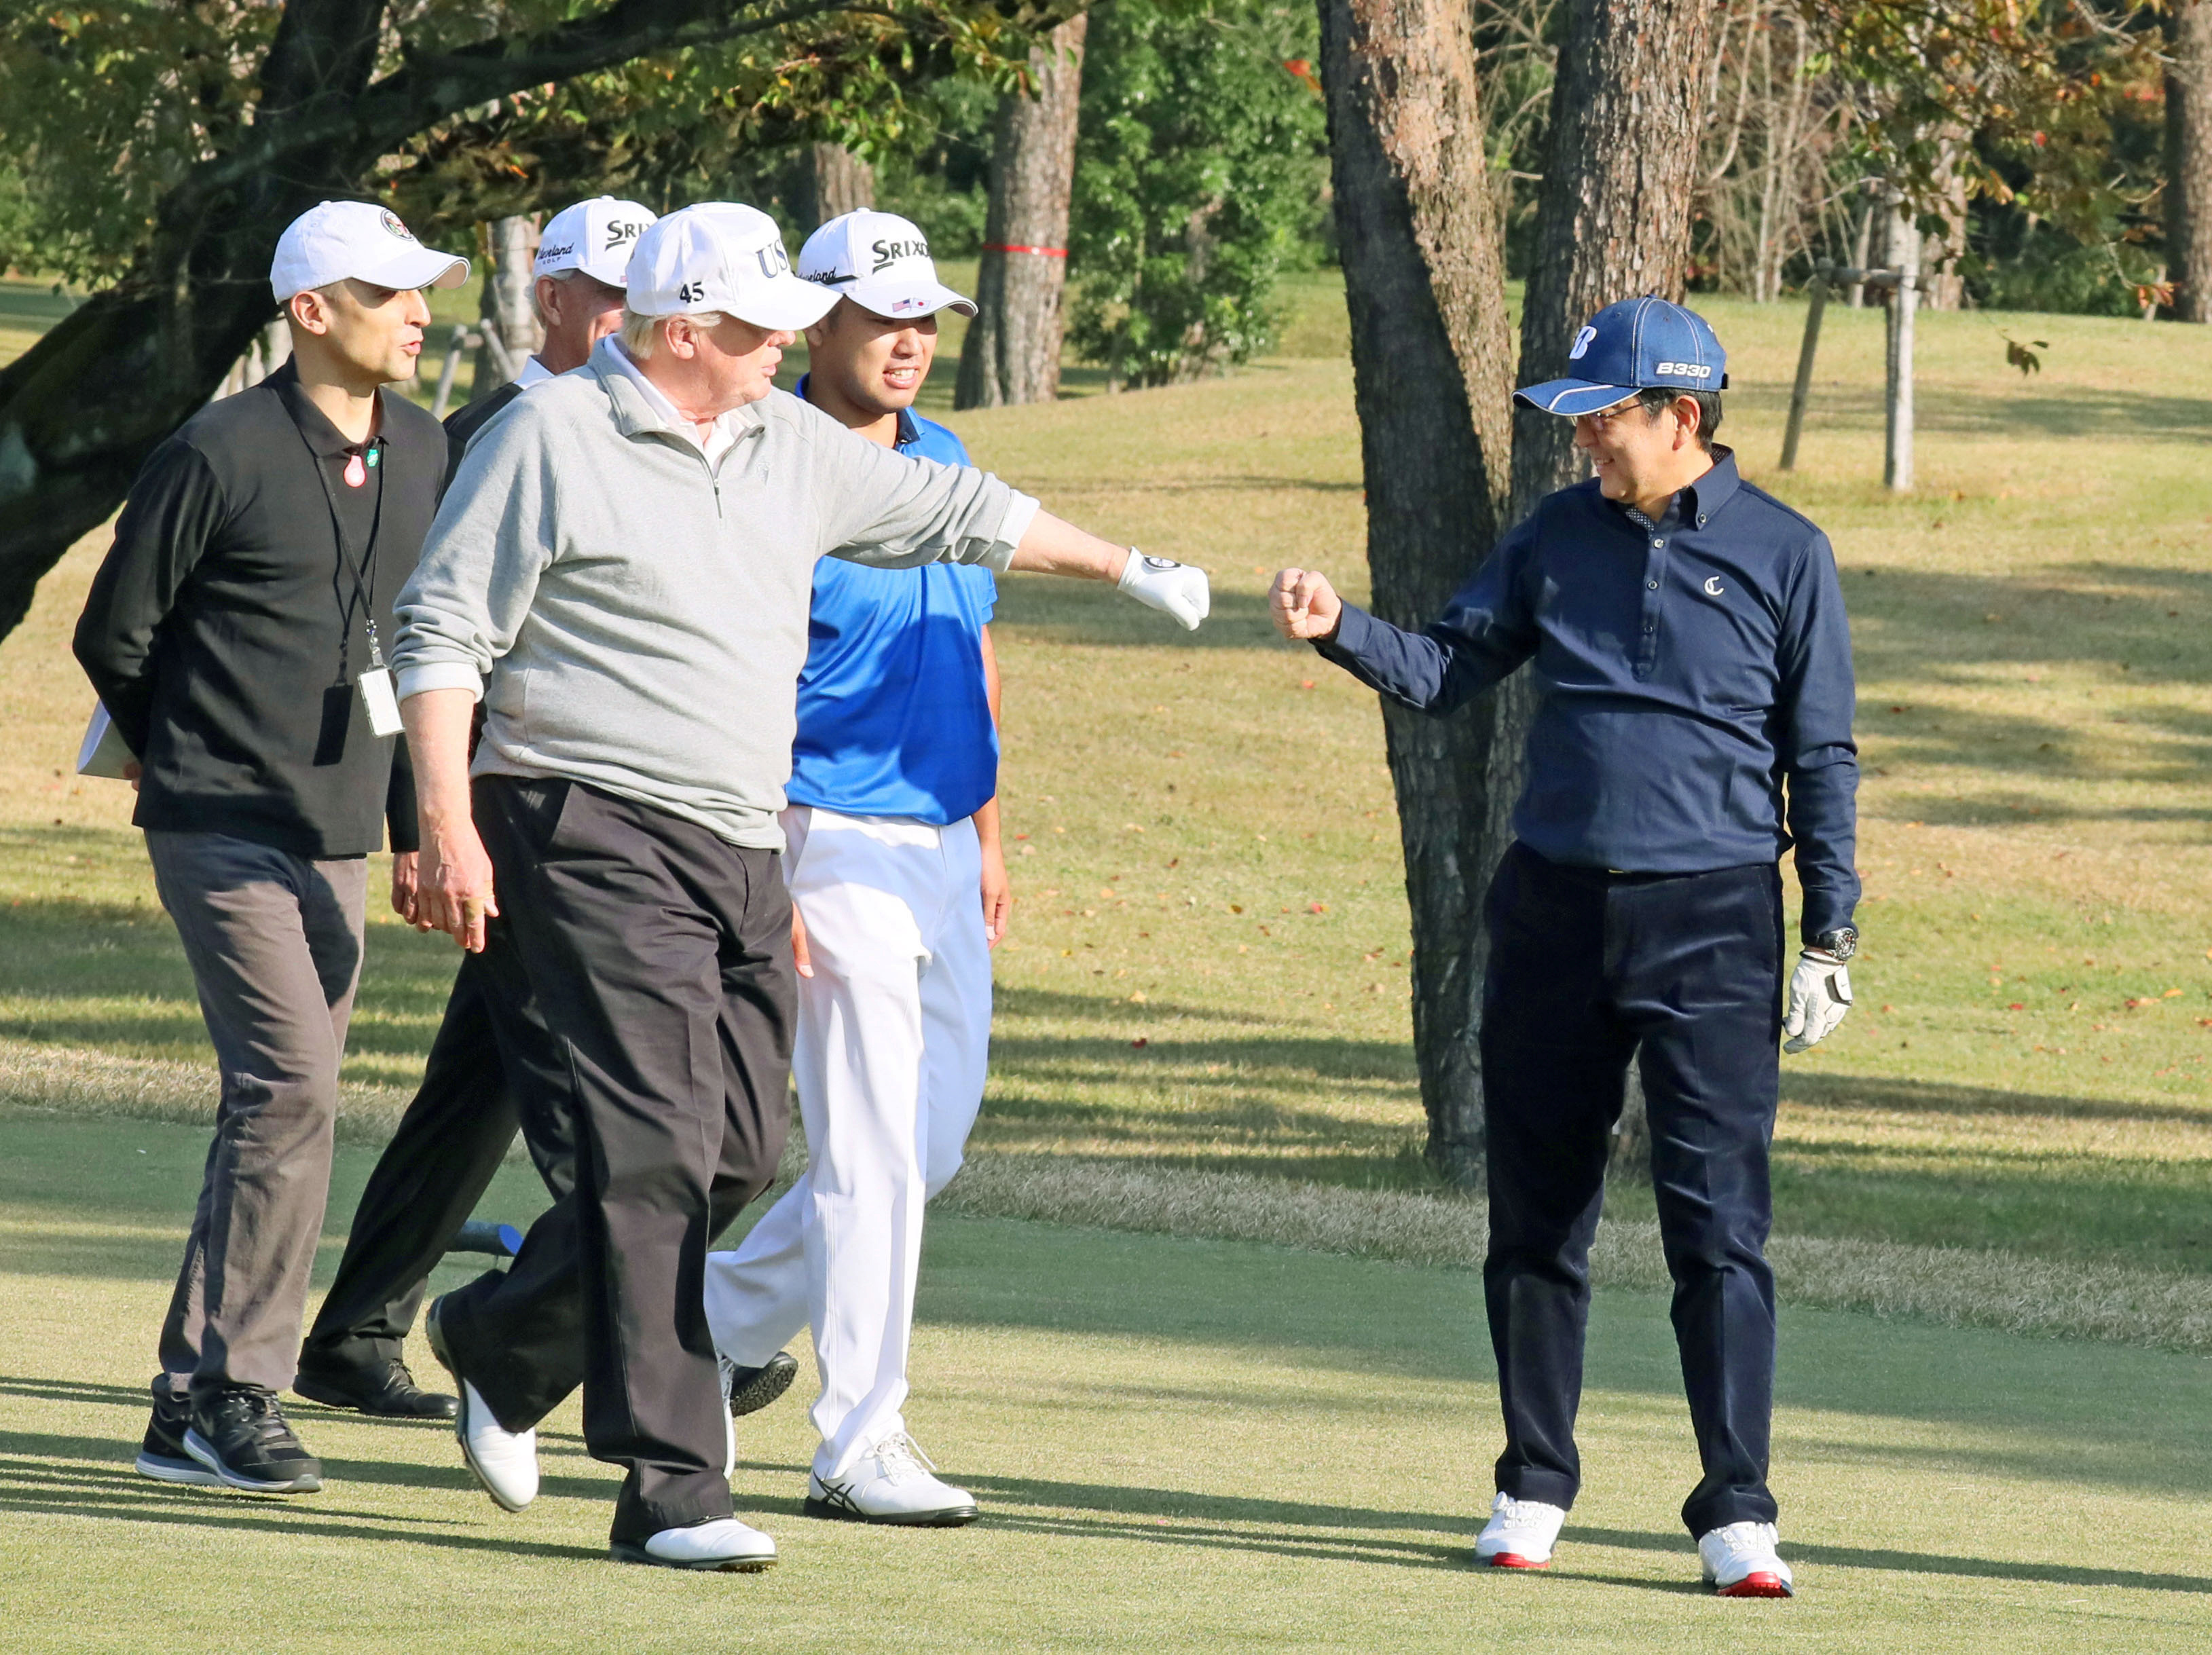 President Donald Trump share a fist bump with Japan's Prime Minister Shinzo Abe as they play golf at the Kasumigaseki Country Club north of Tokyo, Japan on Nov. 5, 2017. (Japan's Cabinet Public Relations Office/Kyodo/via Reuters)